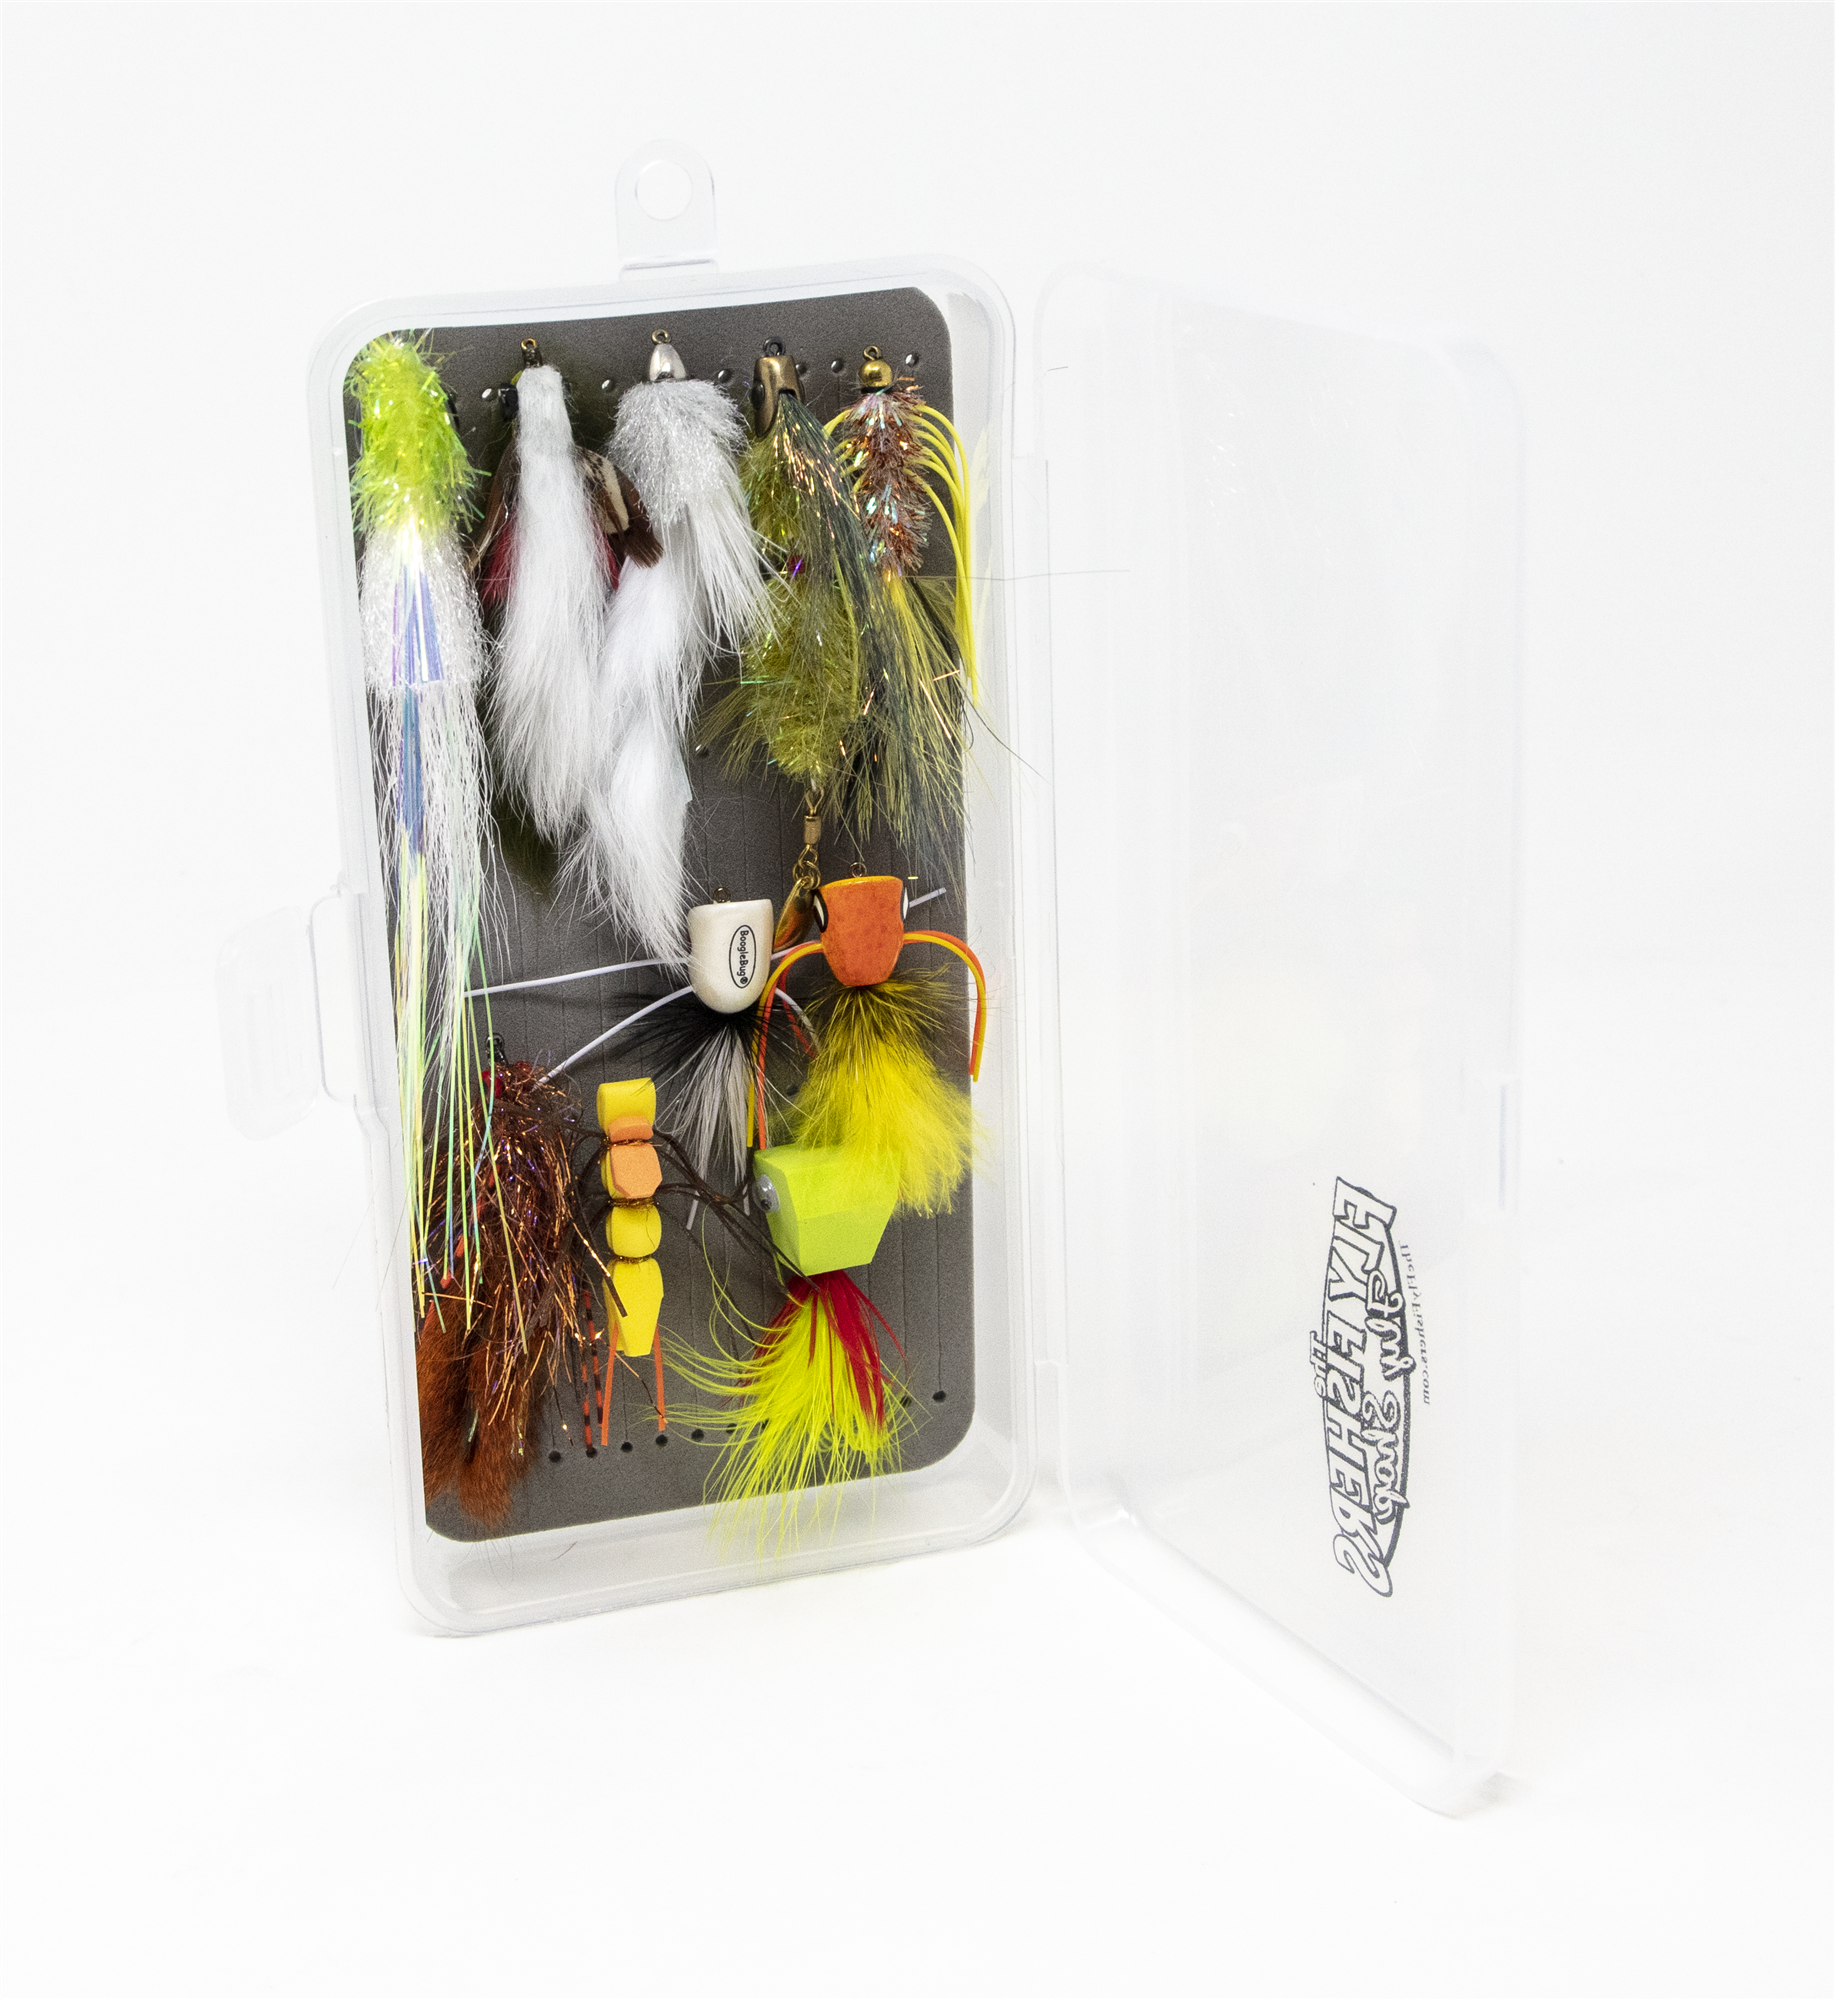 Best Flies For Smallmouth Bass Assortment is a selection of fly fishing flies for bass that are best.